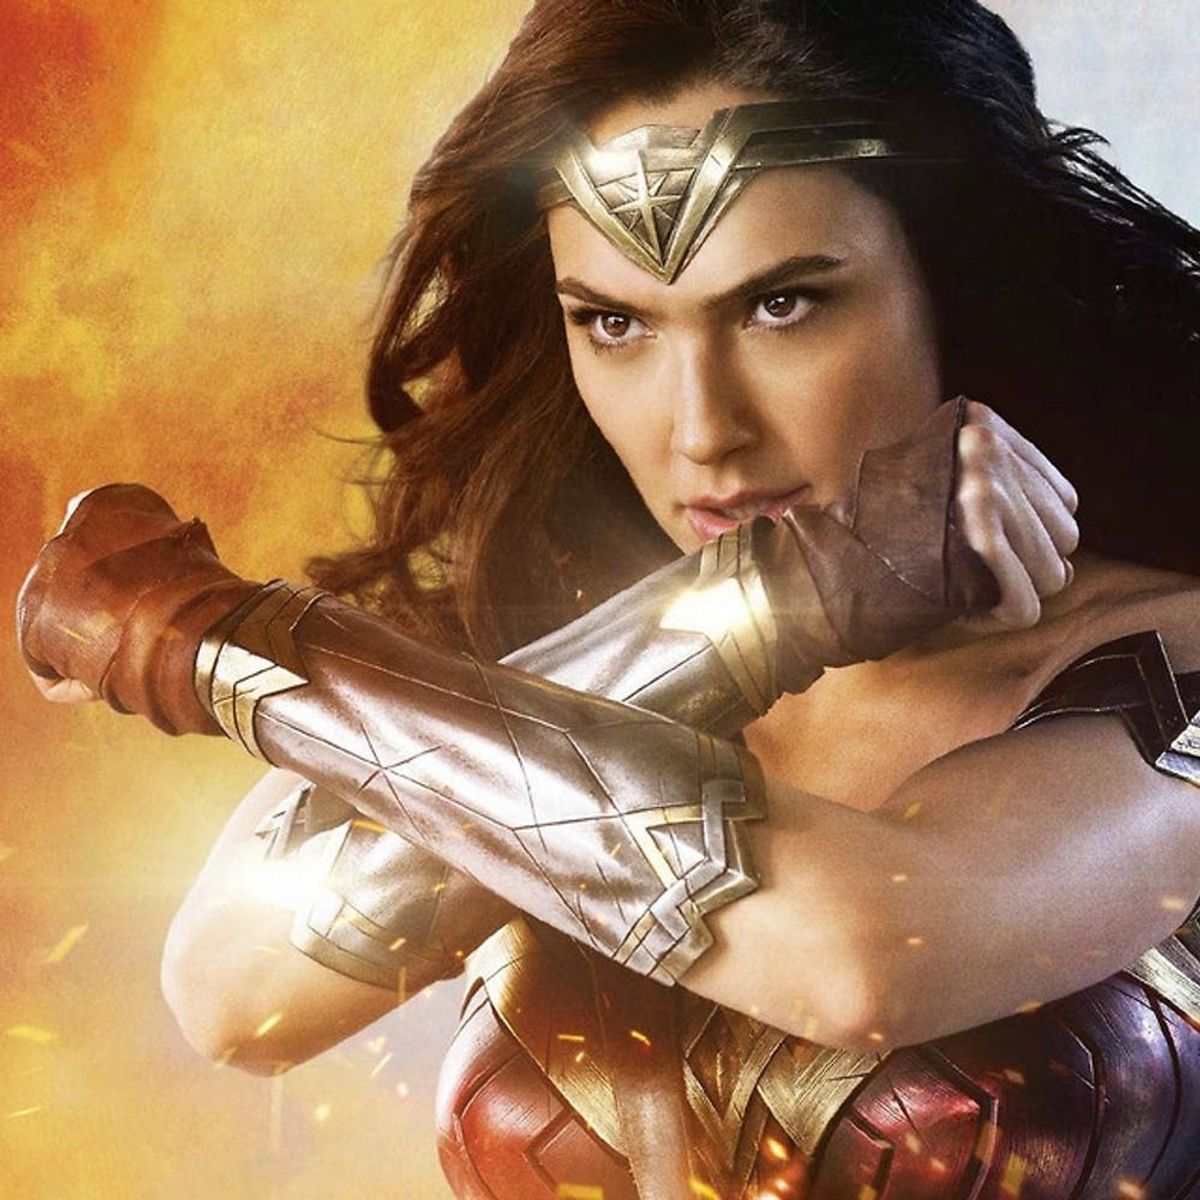 A Wonder Woman Sequel Is in the Works